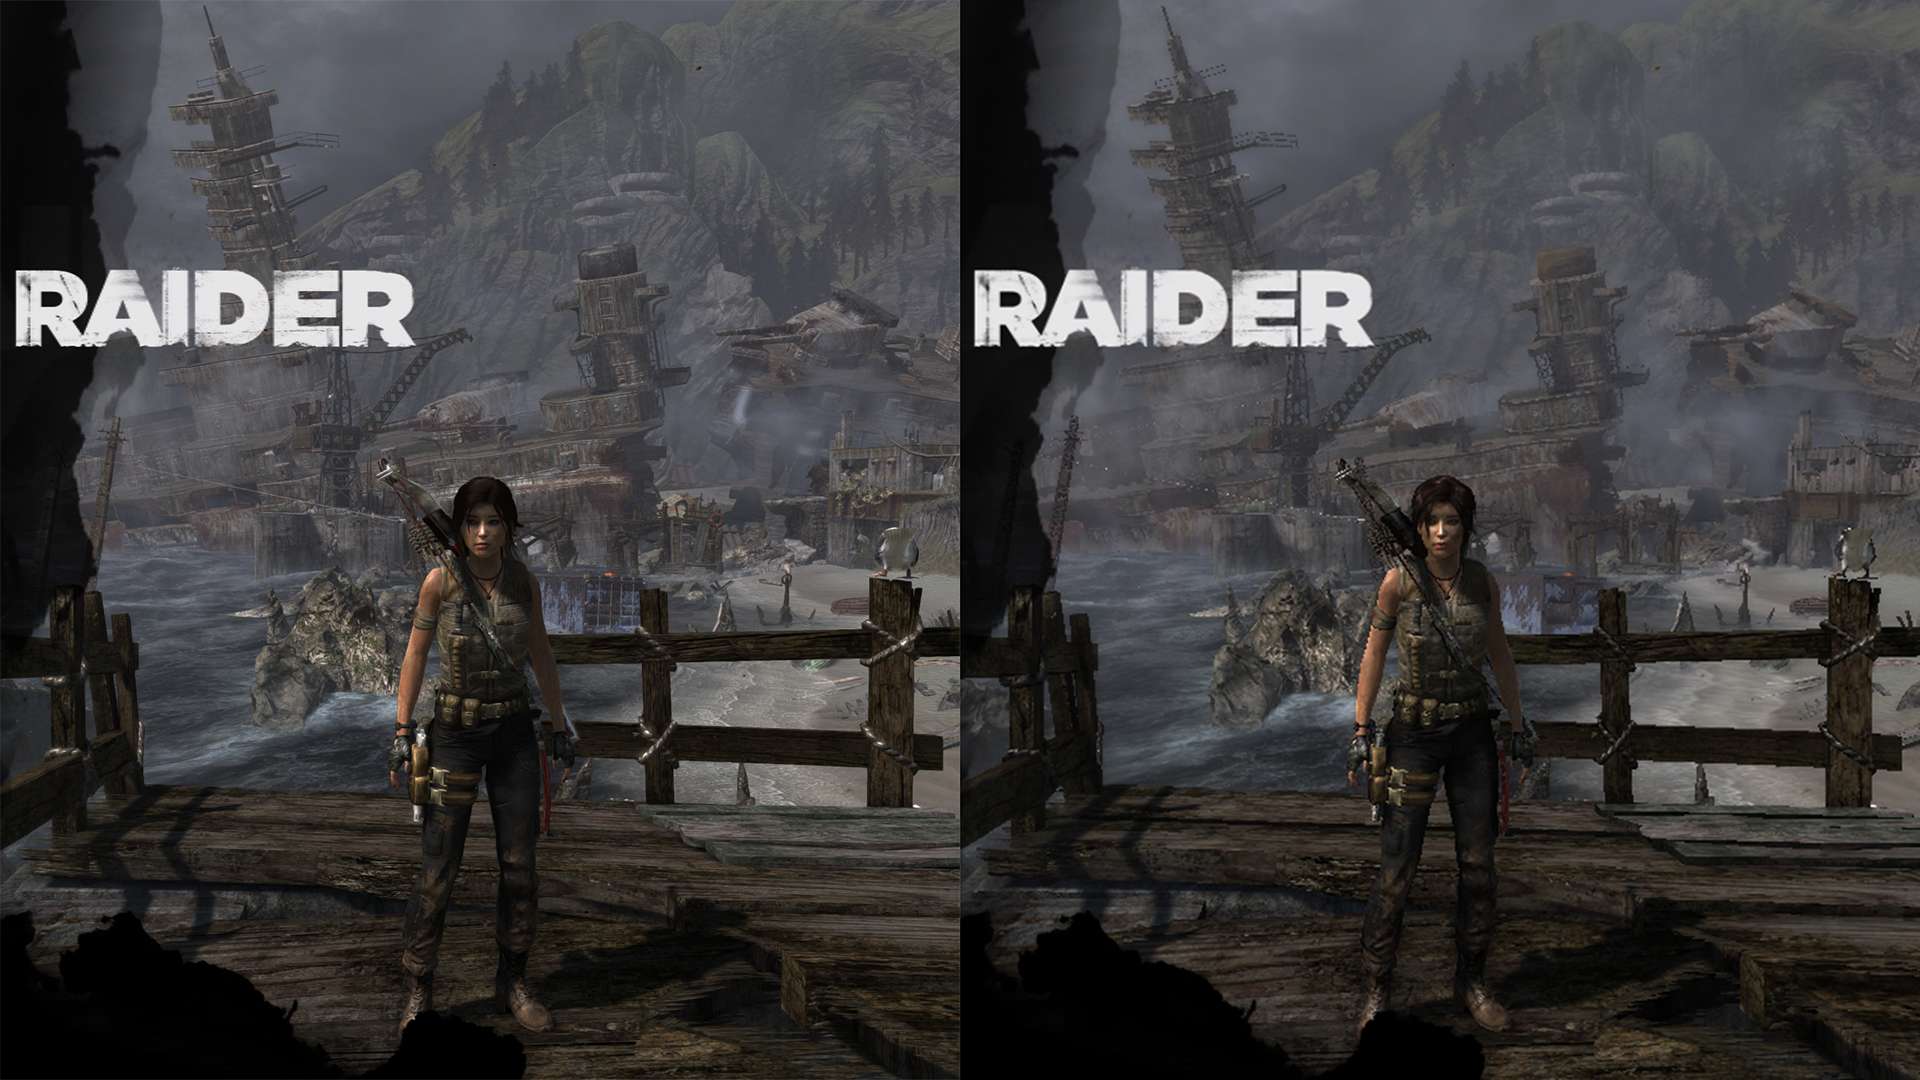 Help I Cant See A Difference 1080p Vs 7p